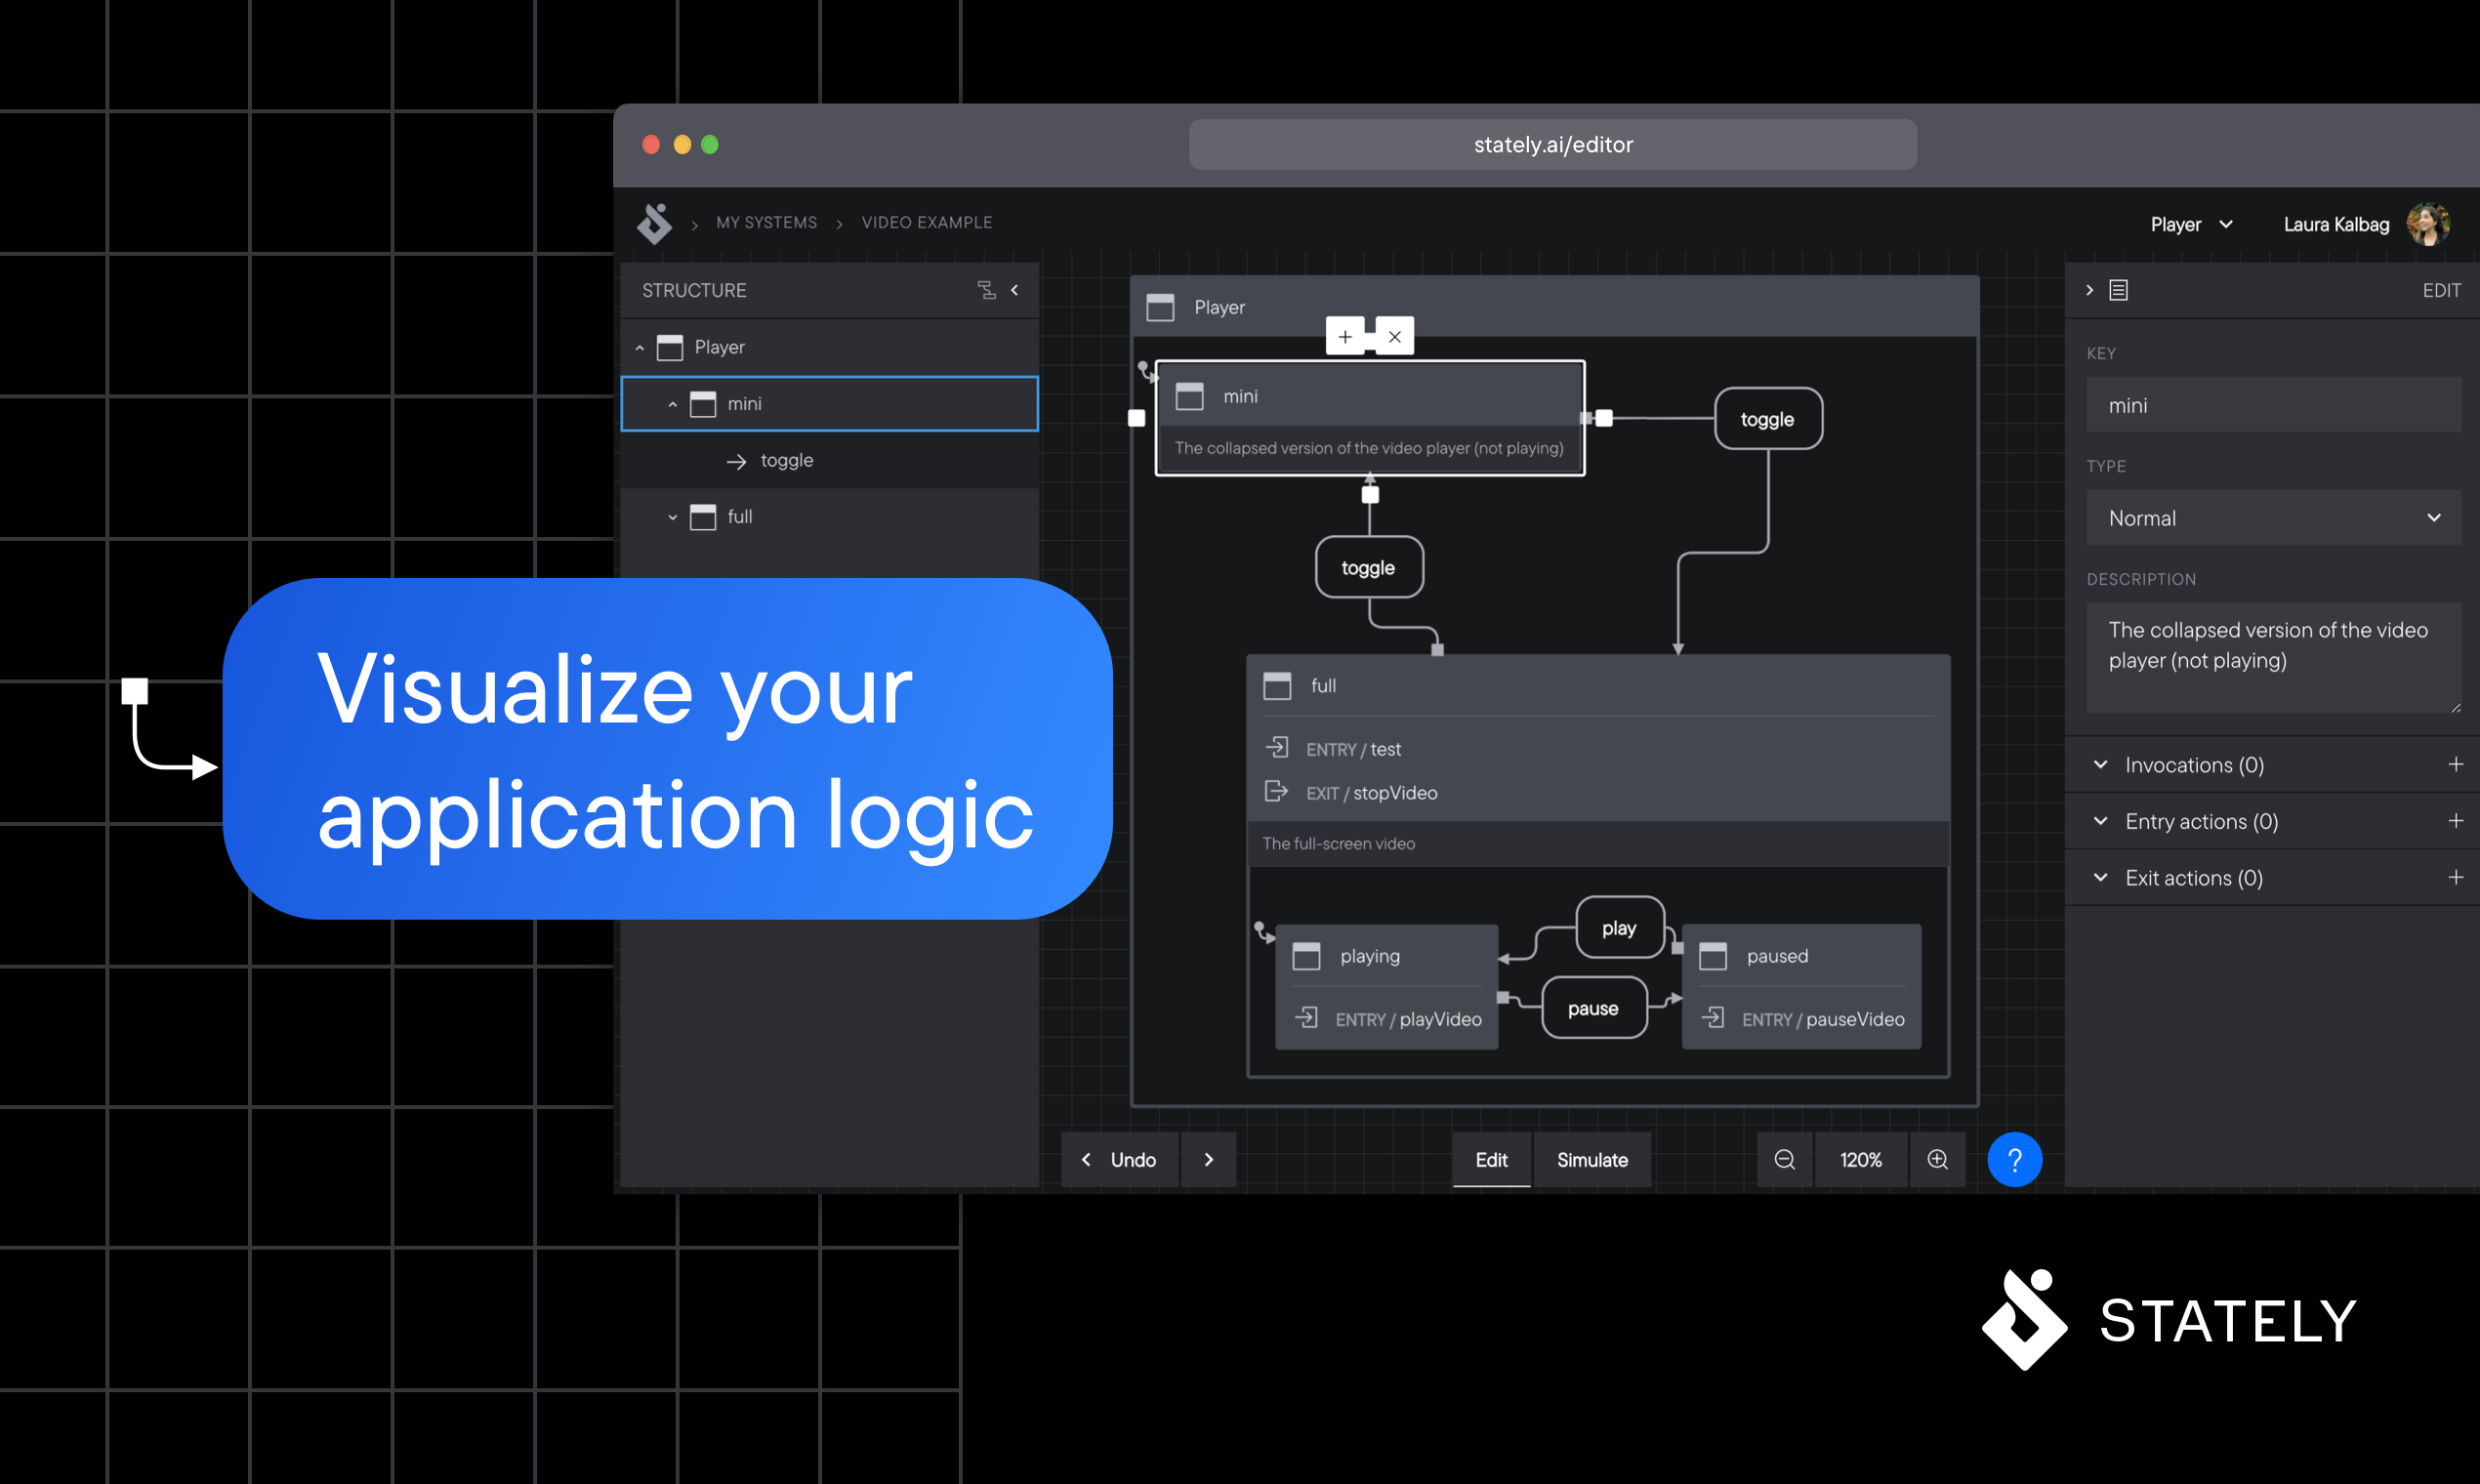 Visualize your application logic with the Stately Editor